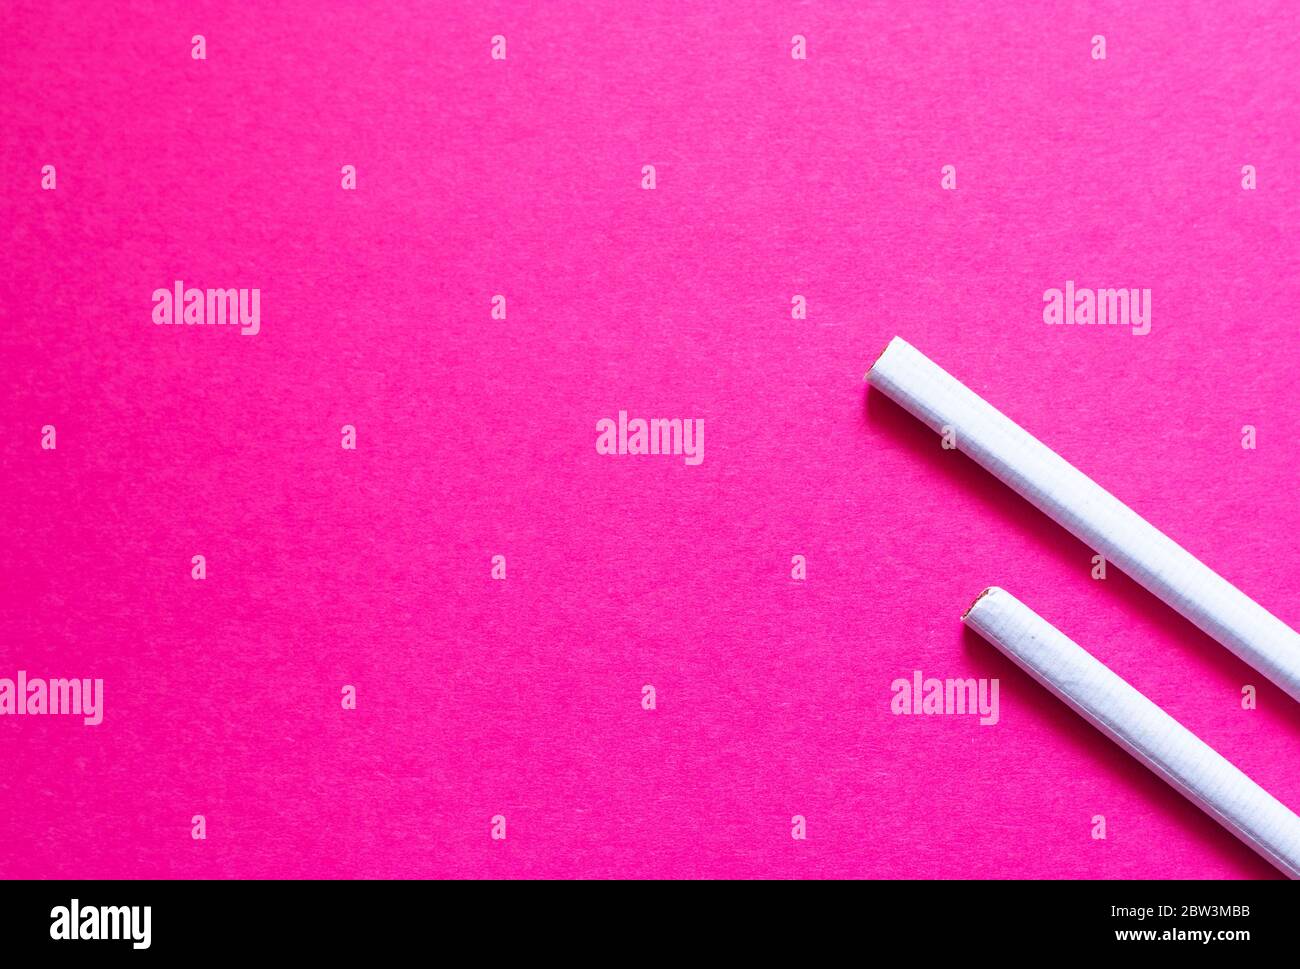 Two cigarettes flat on a pink background. Concept of female smoking, smoking in young girls Stock Photo